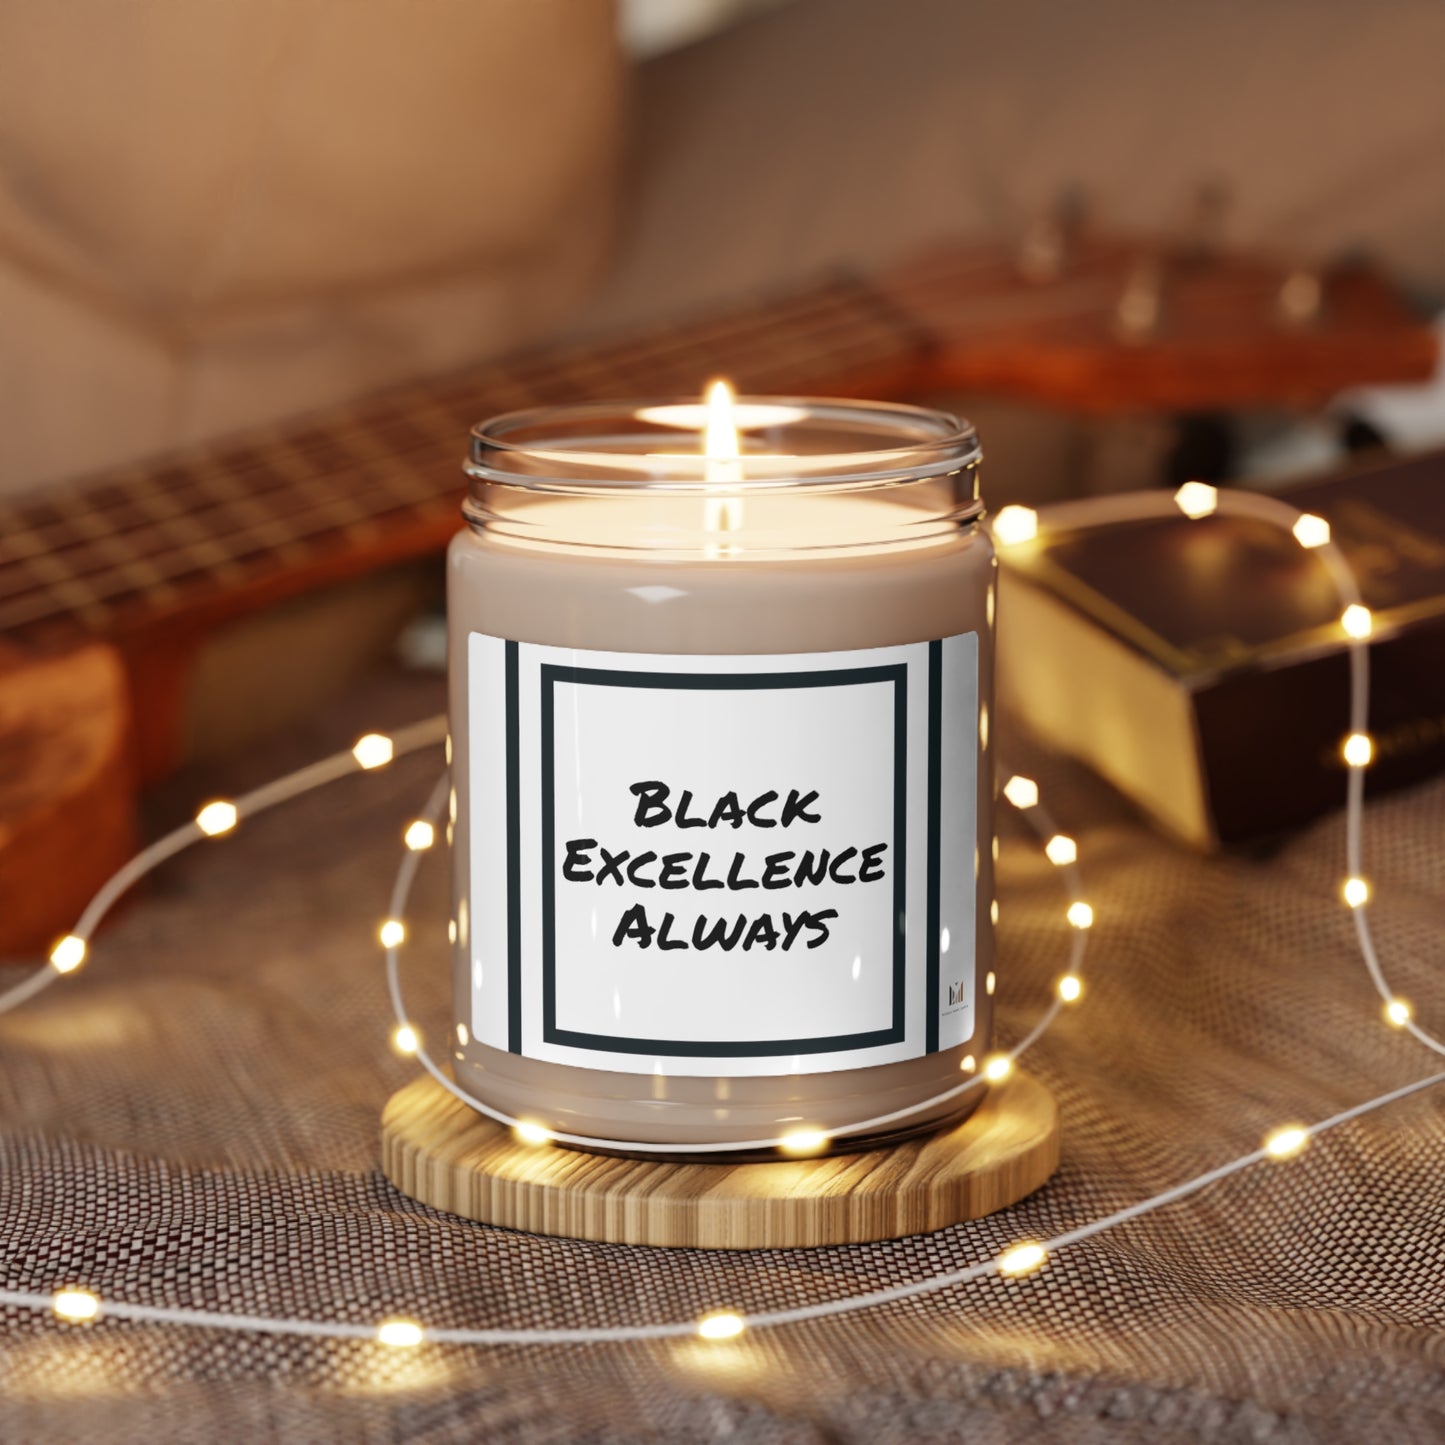 "Black Excellence" Scented Soy Candle, 9oz